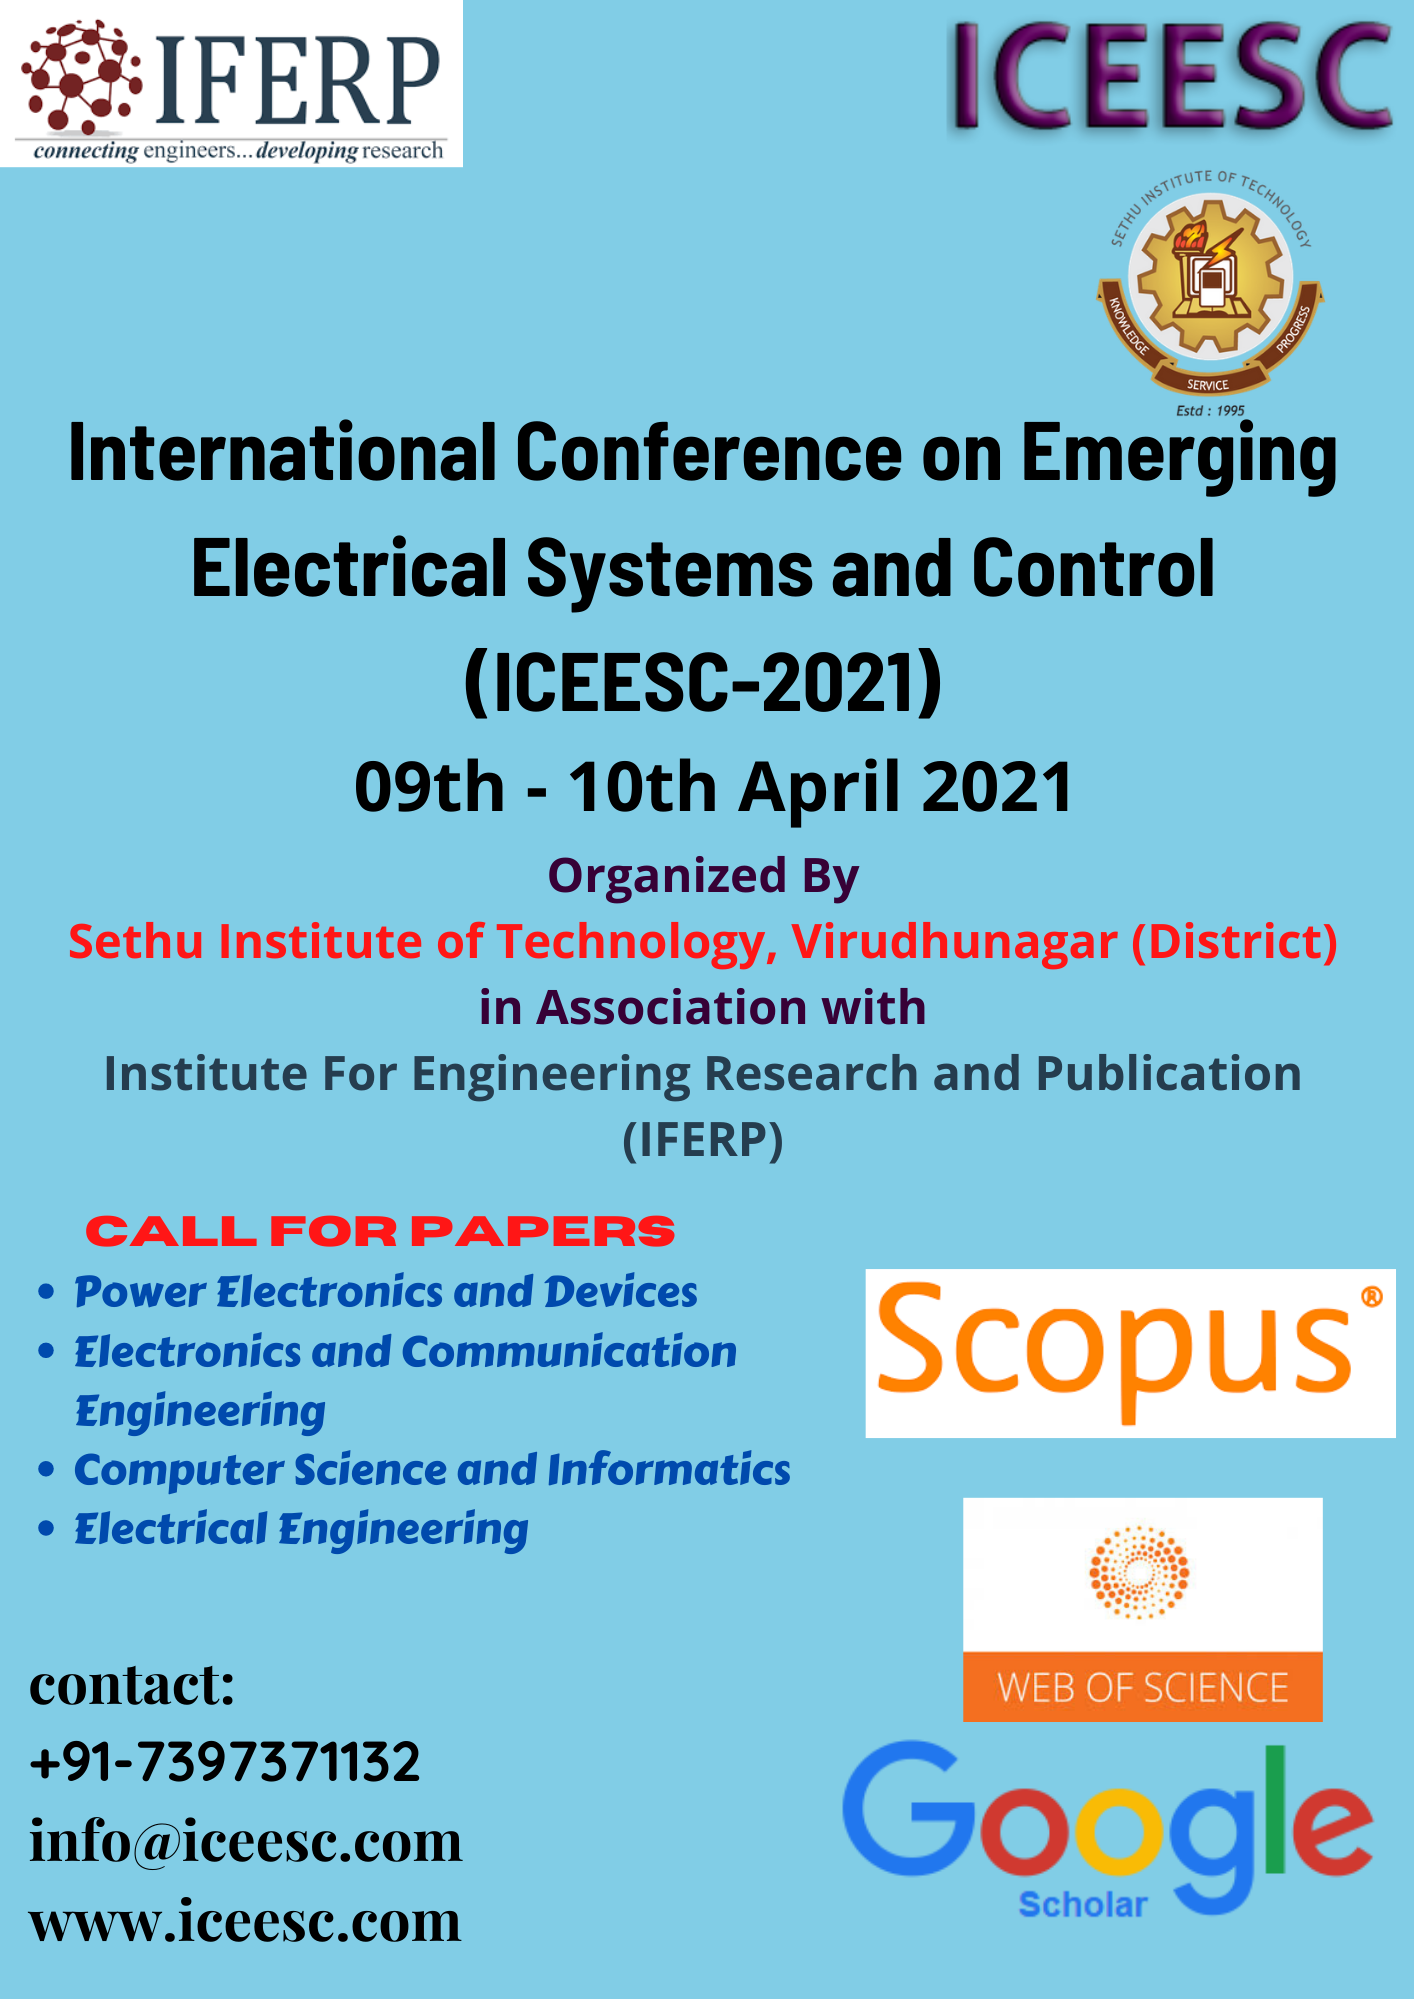 International Conference on Emerging Electrical Systems and Control (ICEESC-2021)